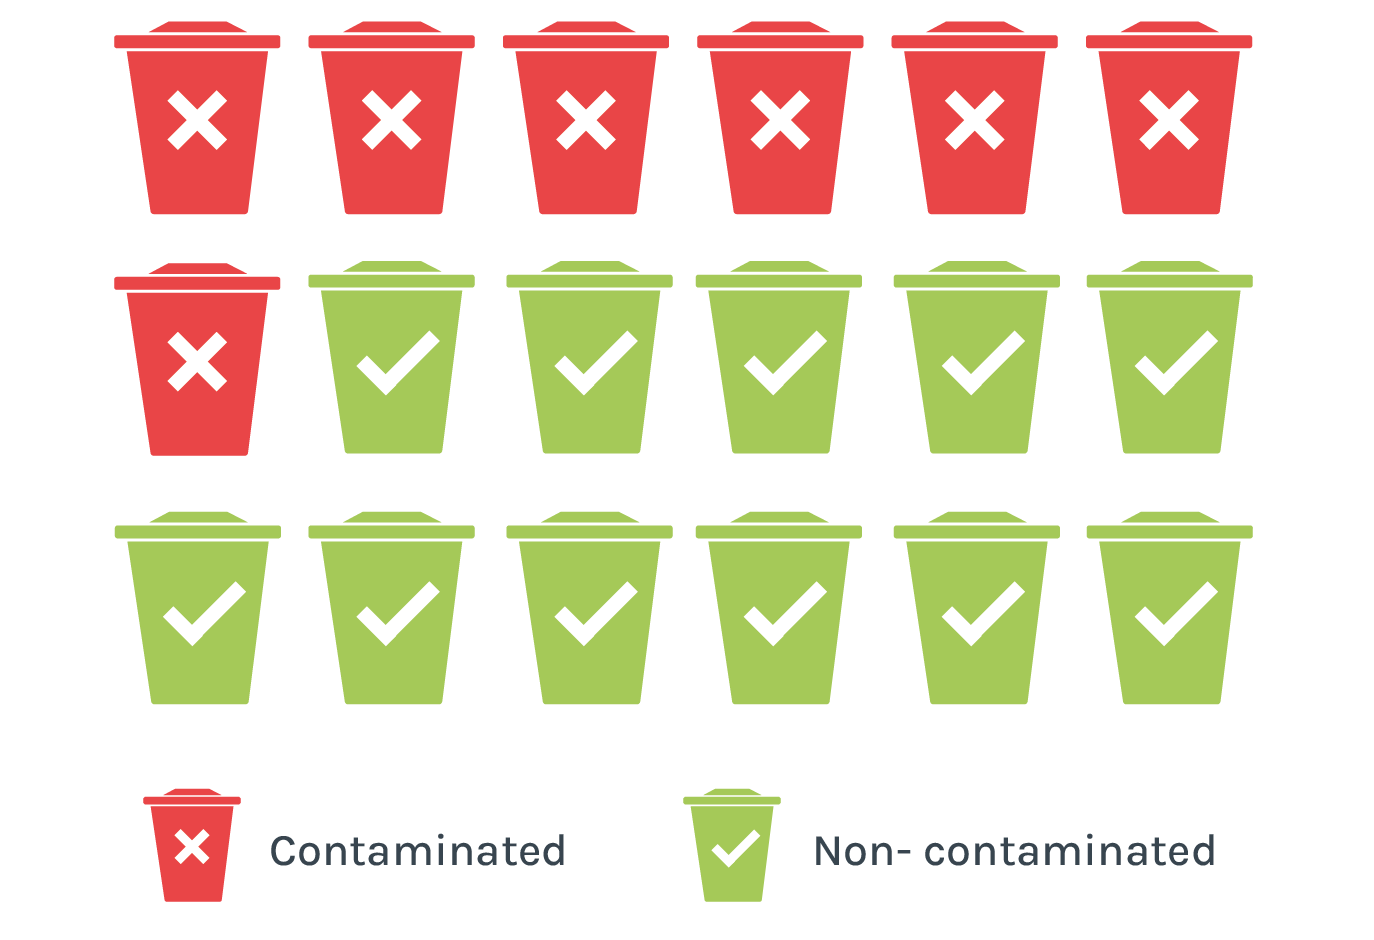 Infographic: 35.8% of recycling bins in County Durham were contaminated in 2021